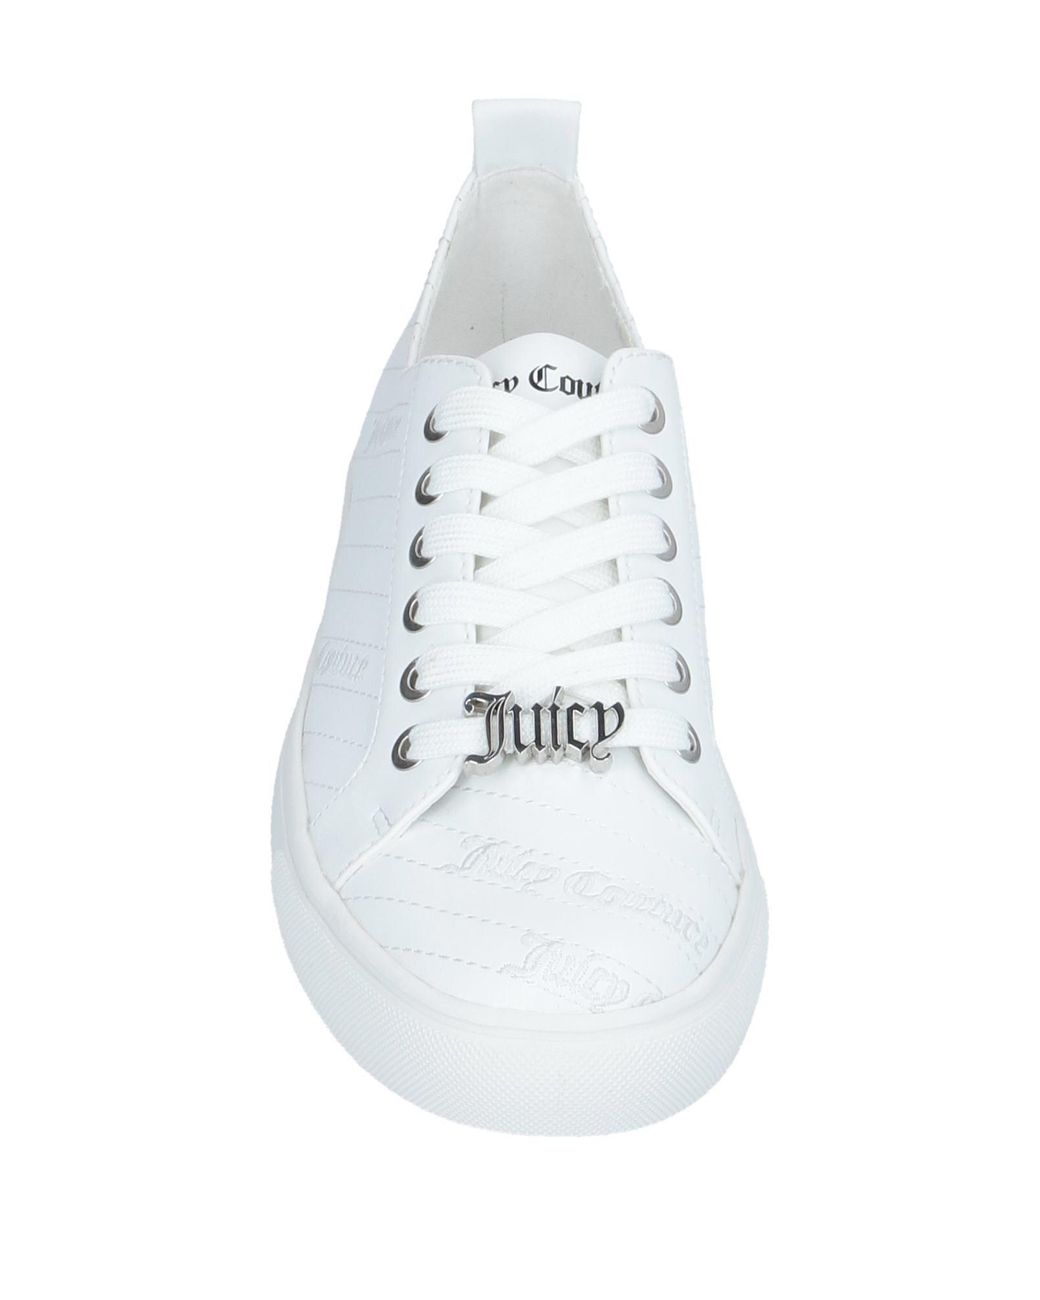 Juicy Couture Charmed Slip-On Sneaker - Free Shipping | DSW